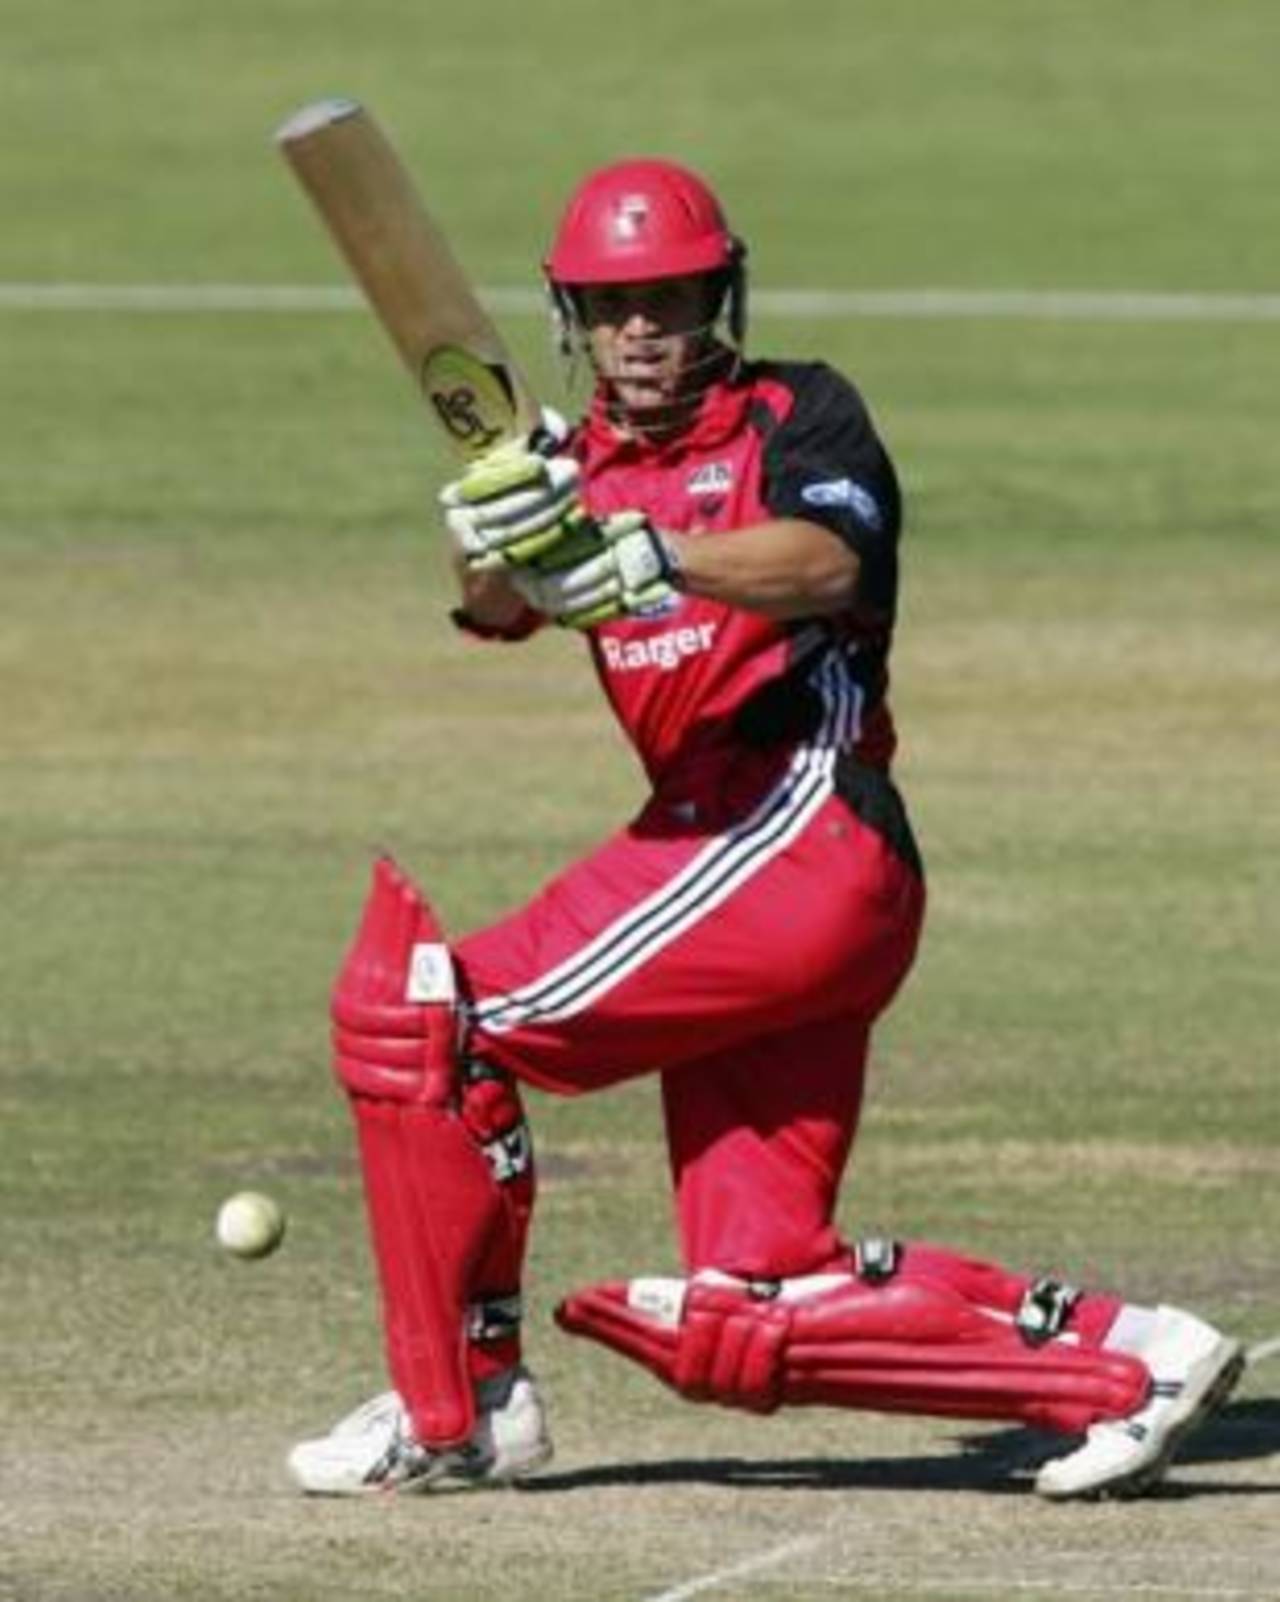 Graham Manou of South Australia bats during the Ford Ranger Cup match between South Australia and New South Wales at the Adelaide Oval, Adelaide, November 8 2006 